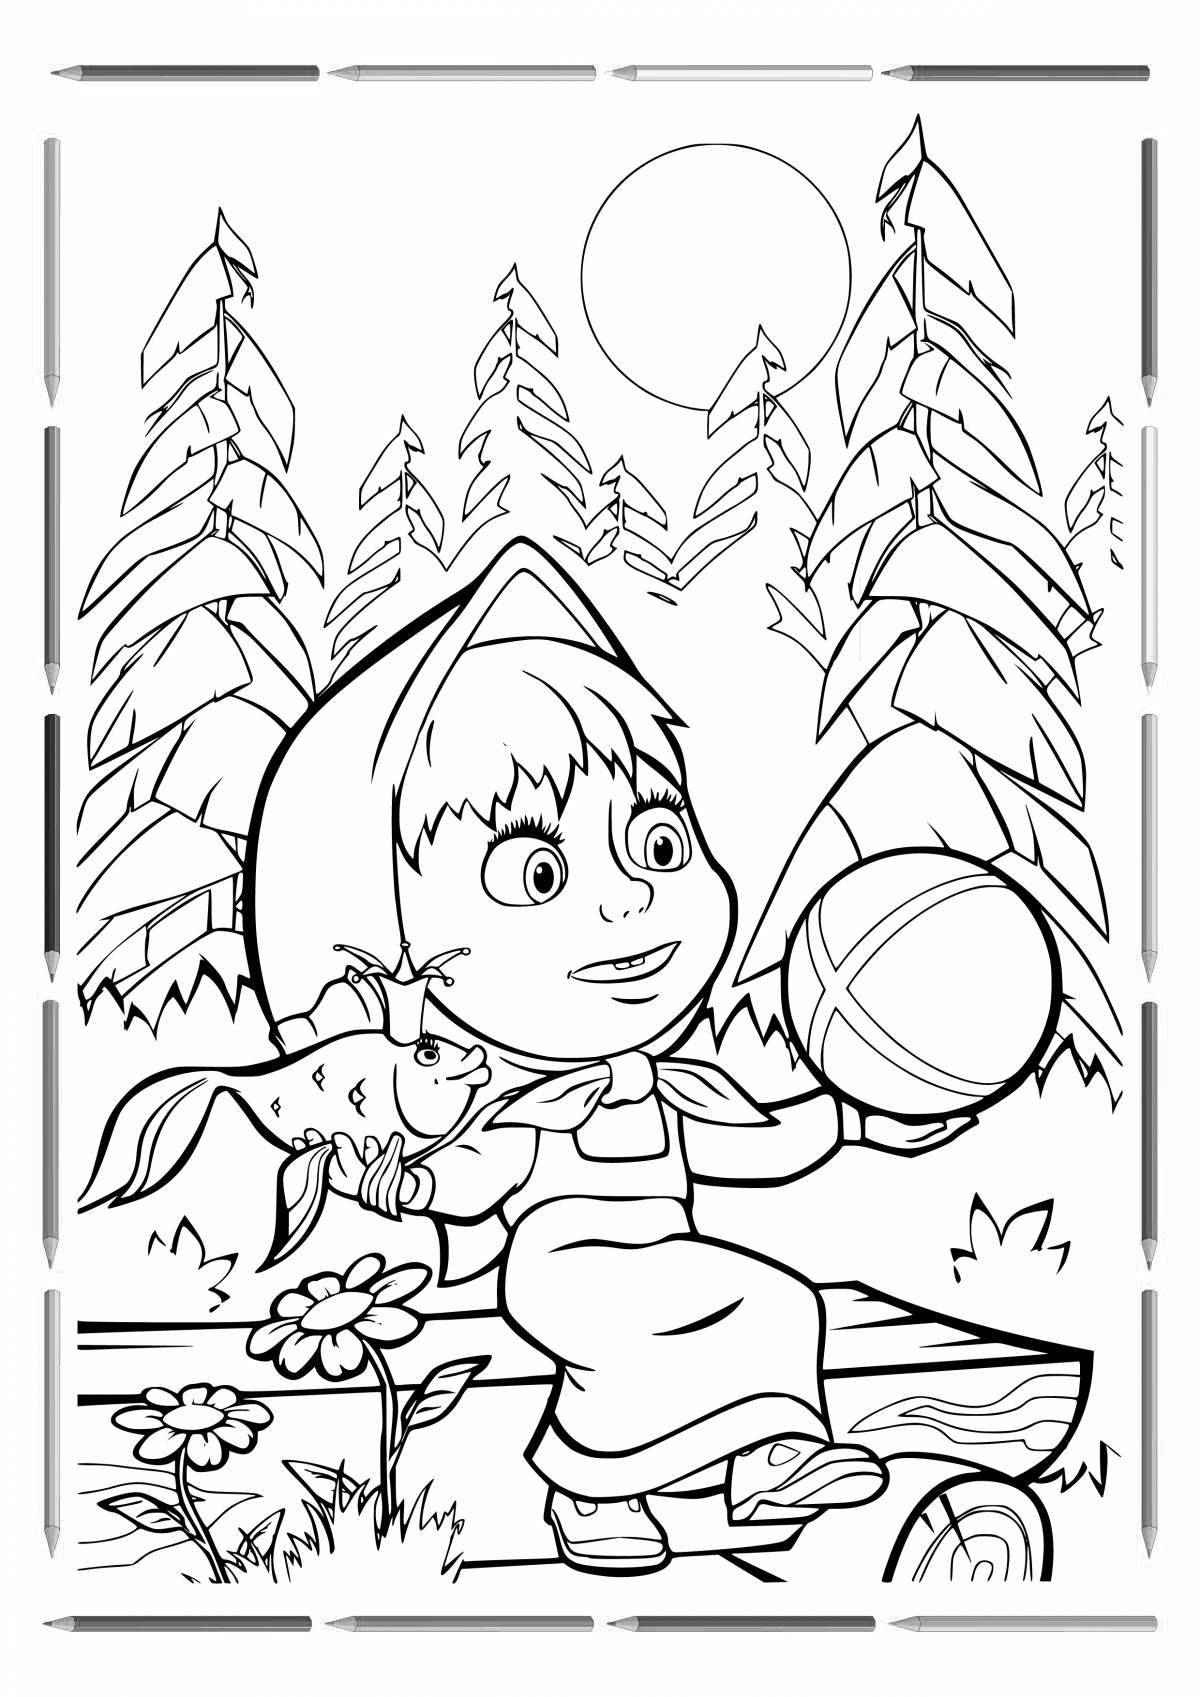 Live Masha and the bear coloring book